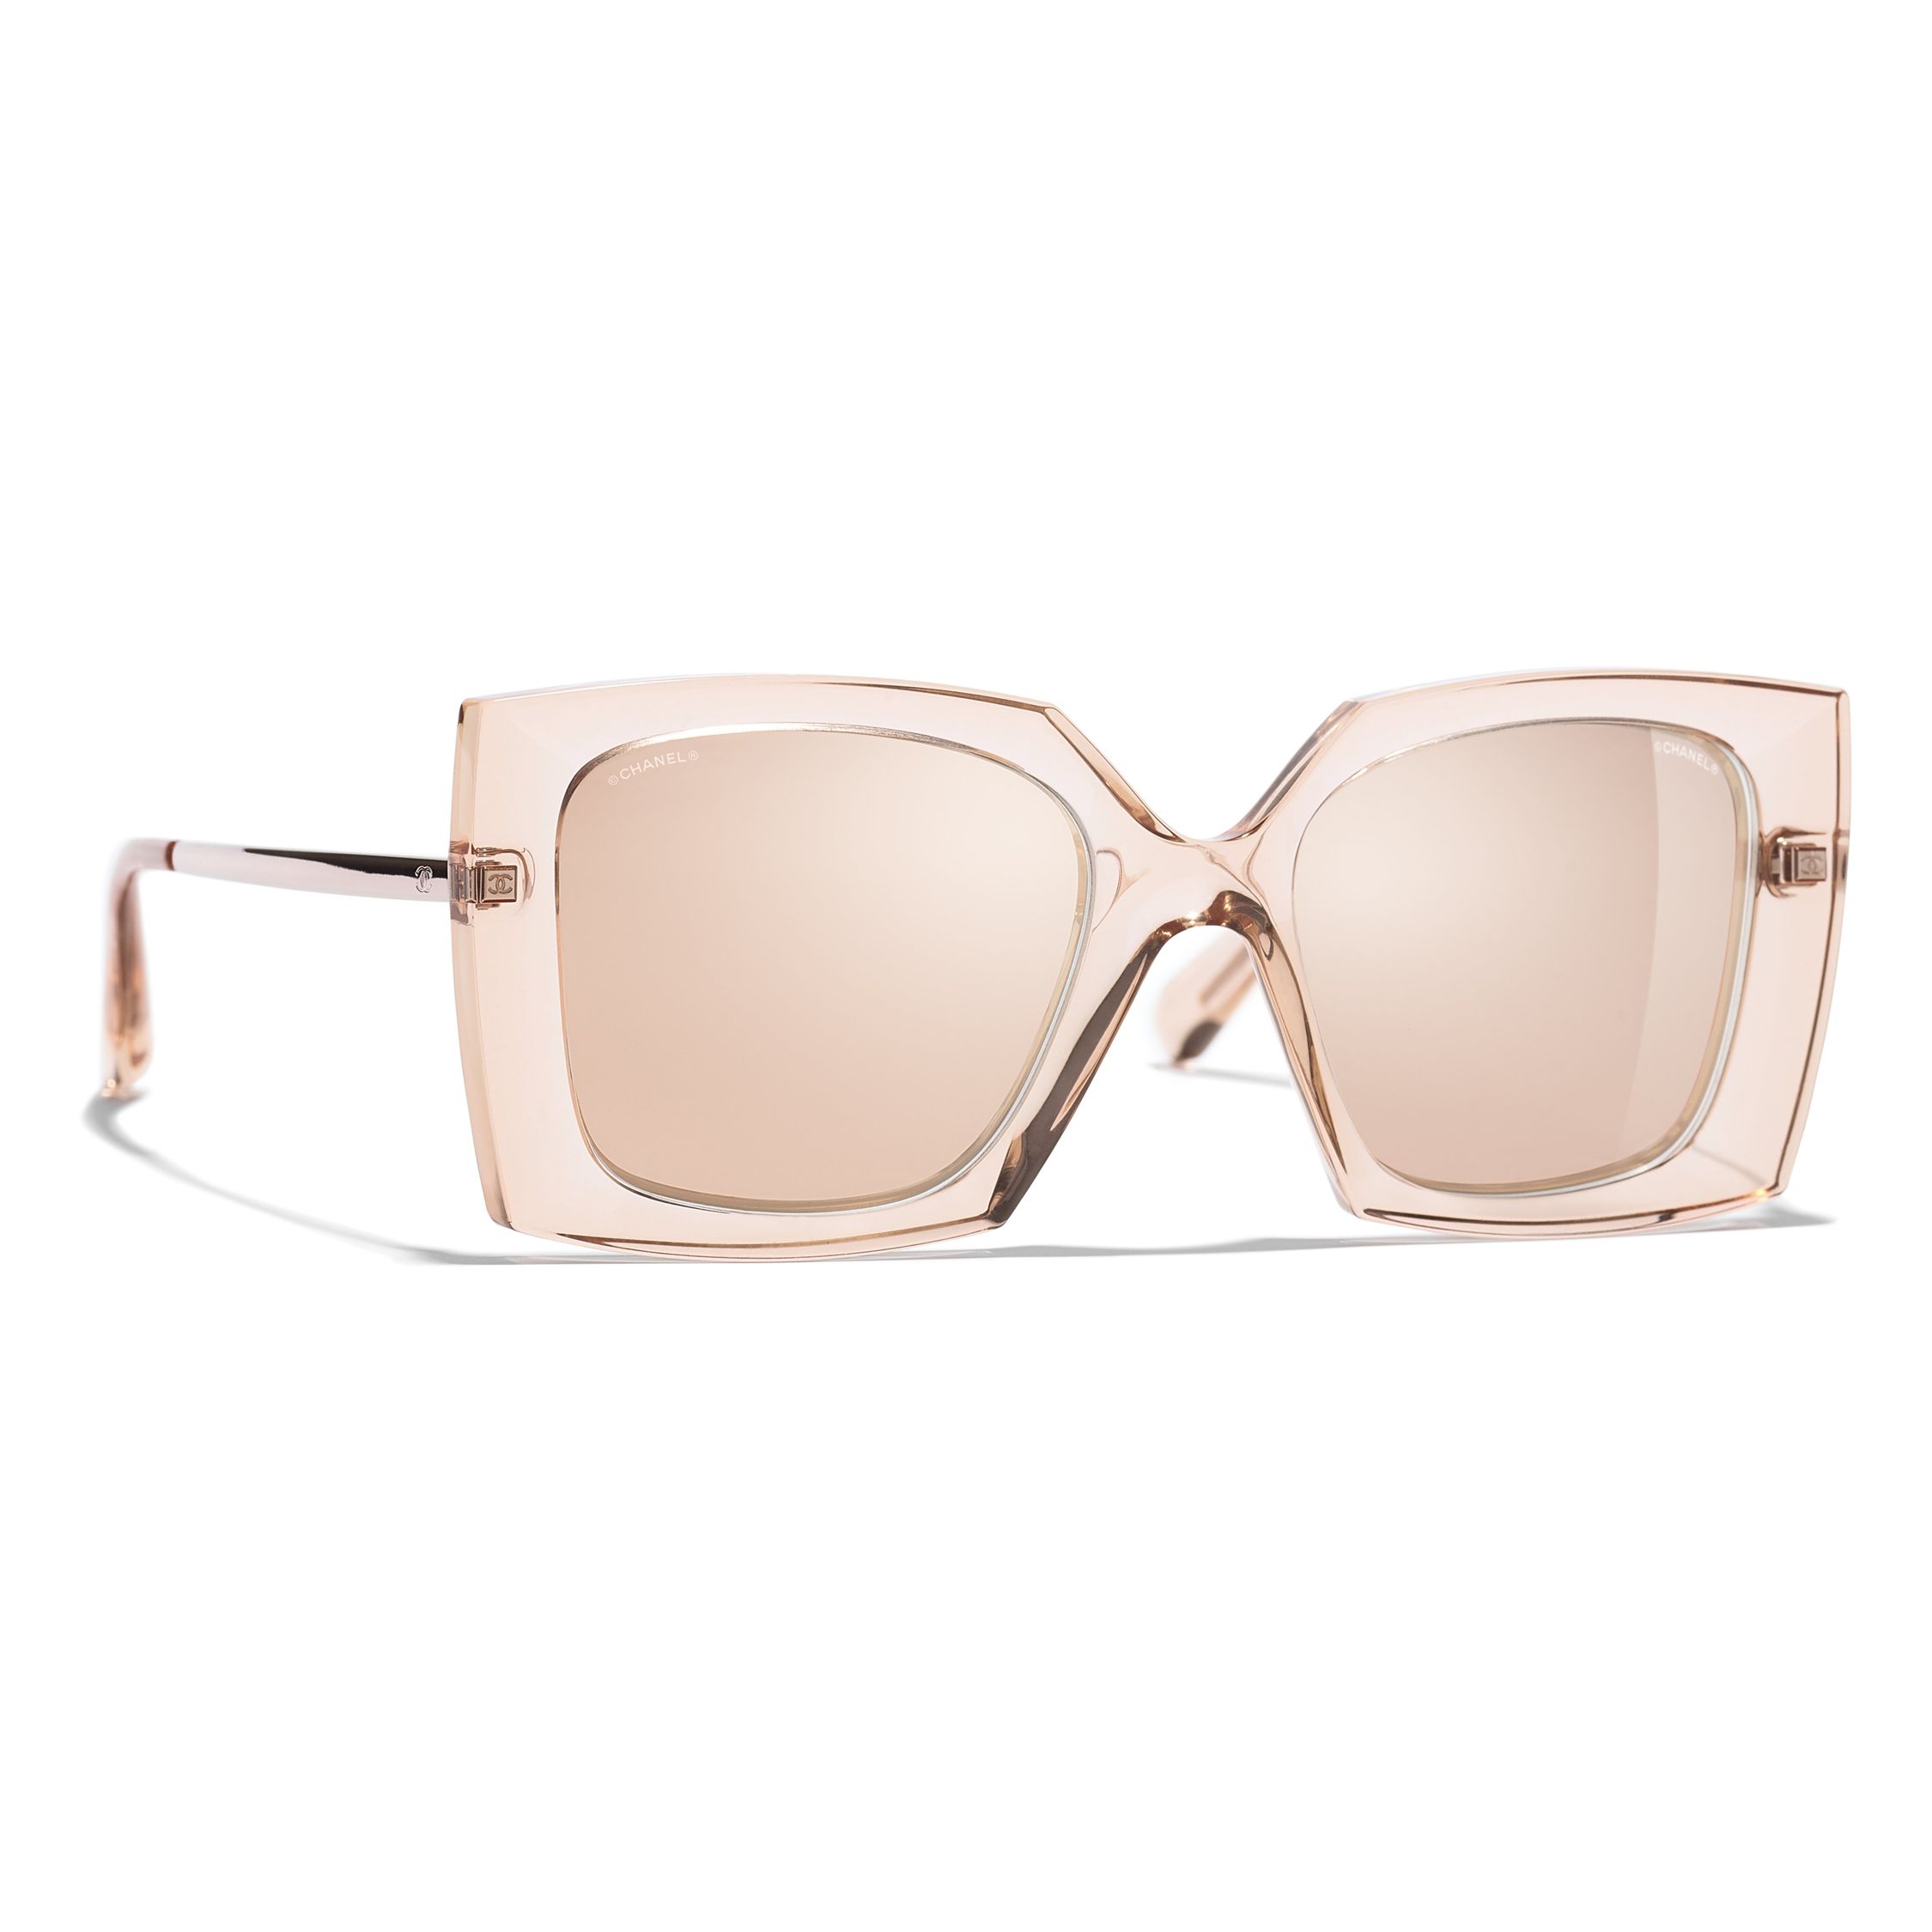 CHANEL Square Sunglasses CH6051 Light Pink/Mirror Pink at John Lewis